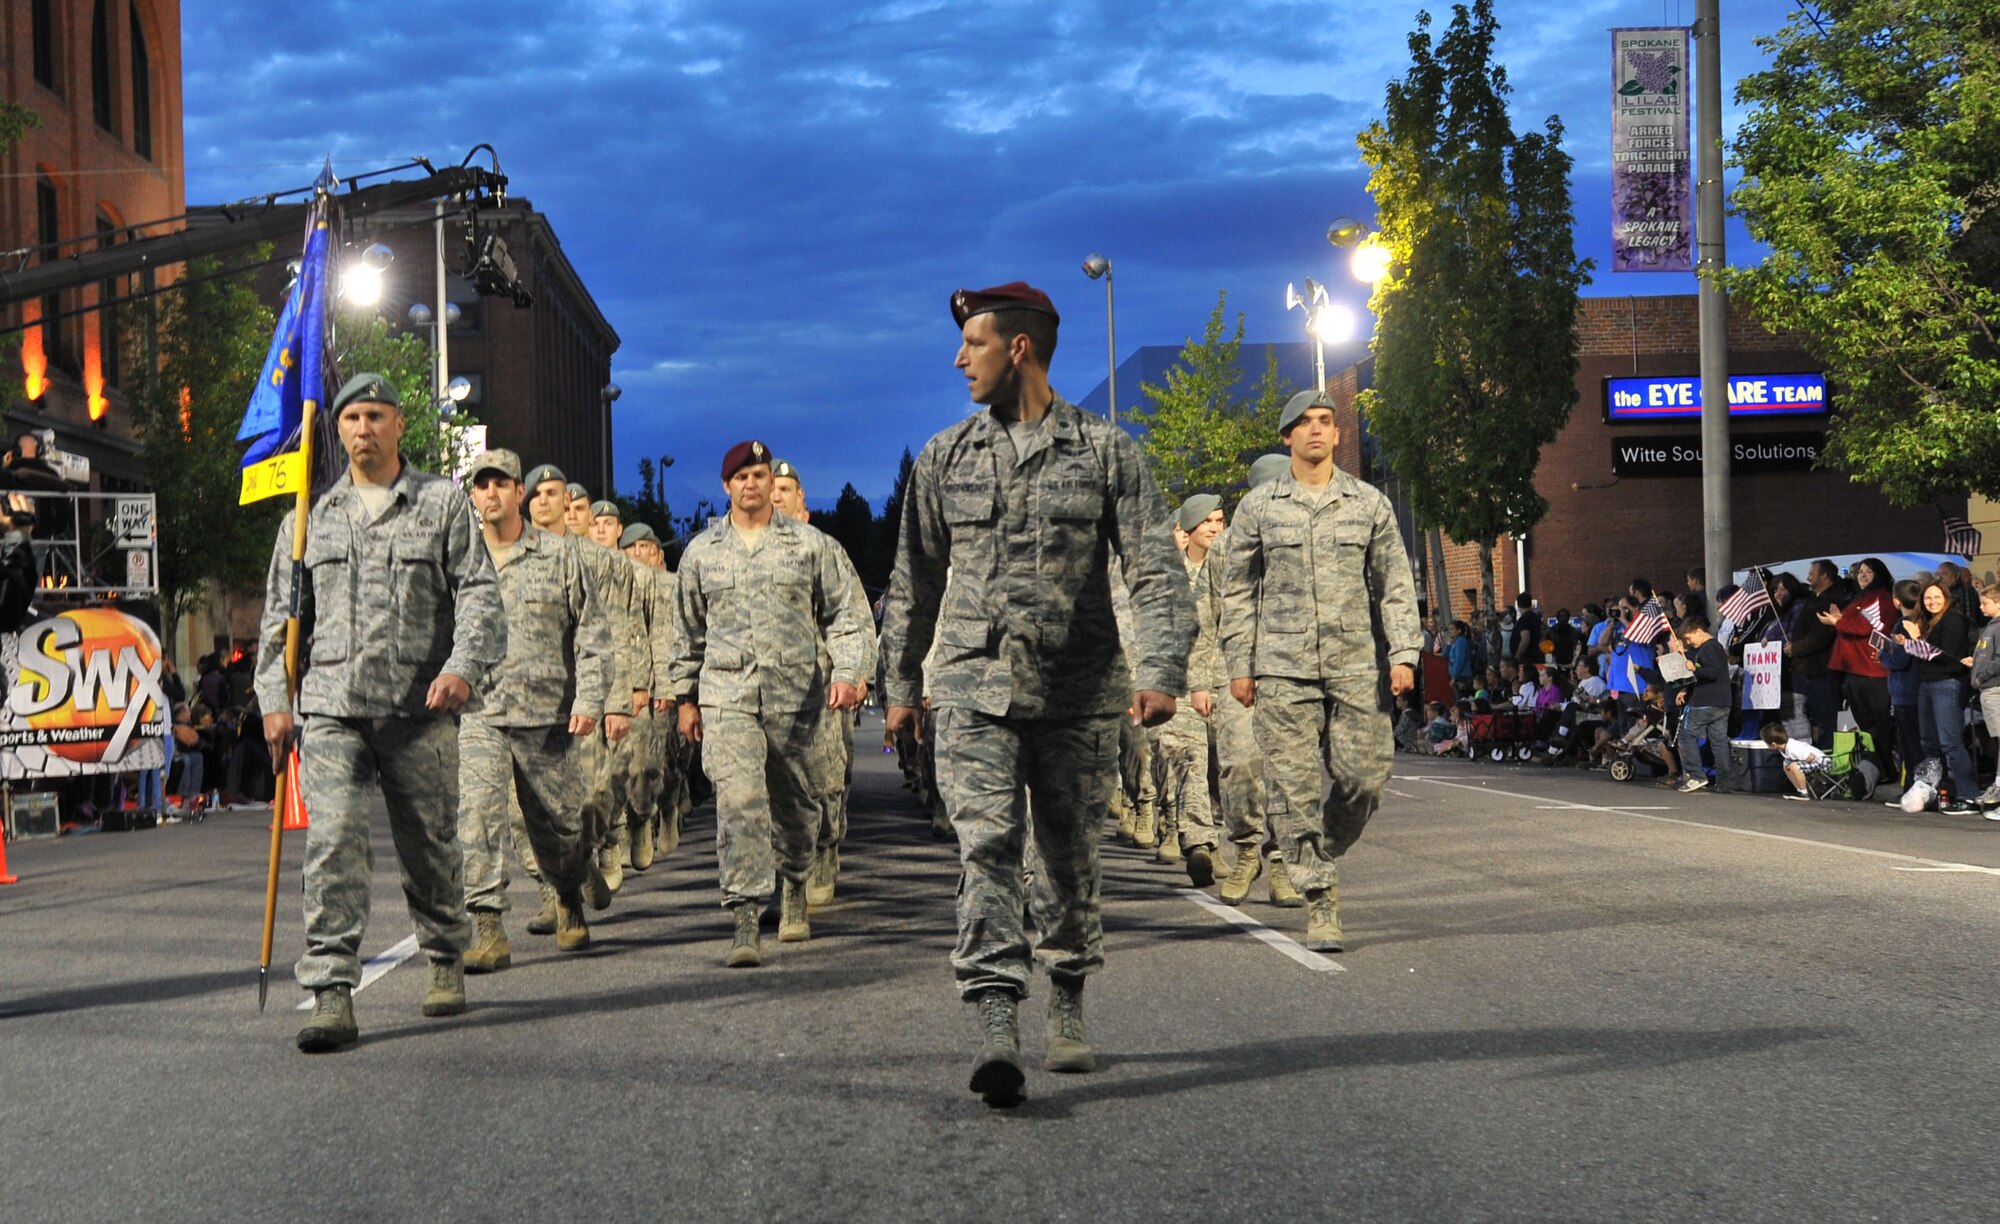 Members from the 336th Training Group Survival, Evasion, Resistance and Escape school march during the Lilac Festival 2014 Armed Forced Torchlight Parade in Spokane Wash., May 17, 2014. The 75-year-old tradition is made to honor service members of both the past and present. Thomas is the 336th Training Group commander. (U.S. Air Force photo by Staff Sgt. Veronica Montes/Released) 